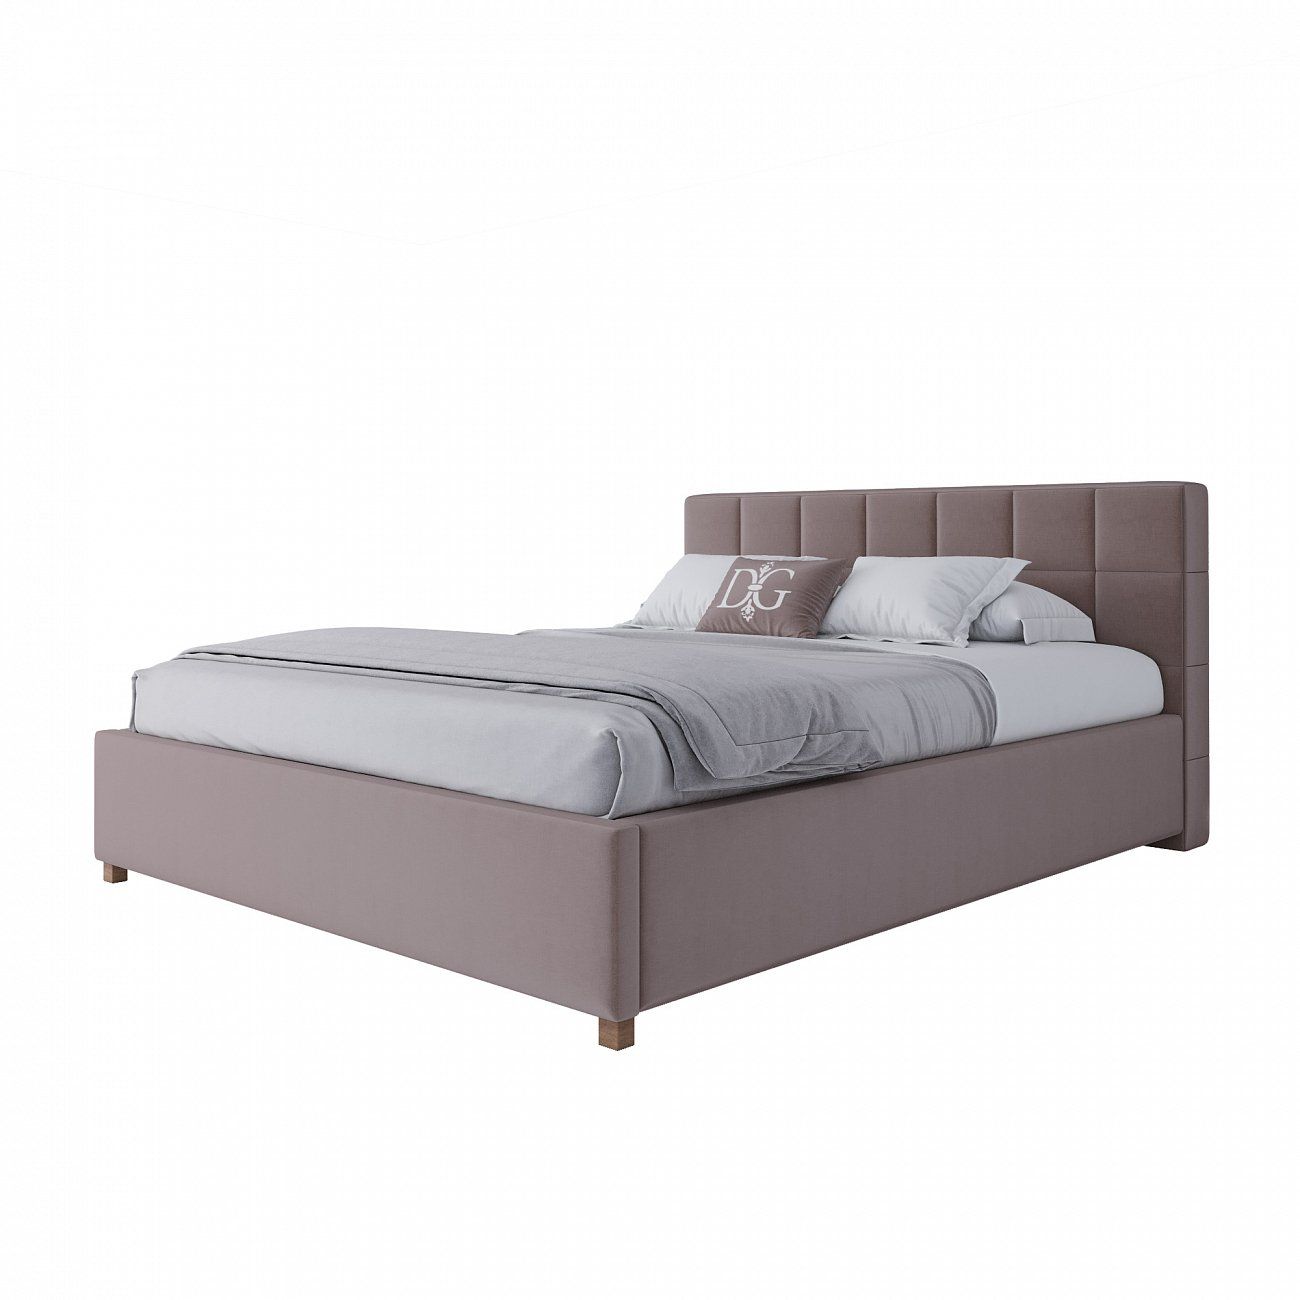 Double bed with upholstered headboard 160x200 cm dusty rose Wales